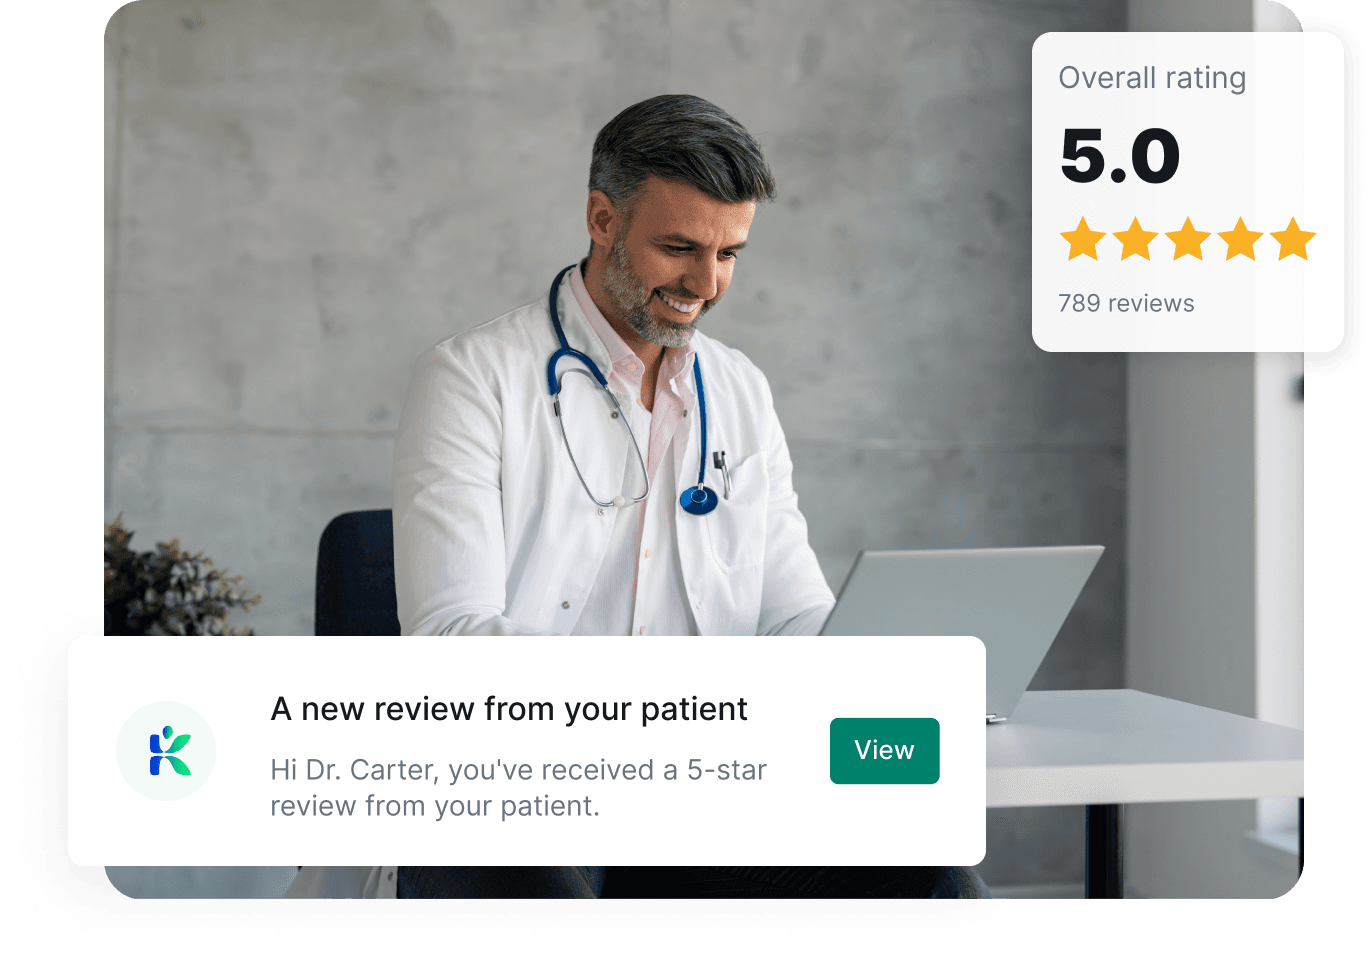 Easy and effective online reputation management for medical practices 